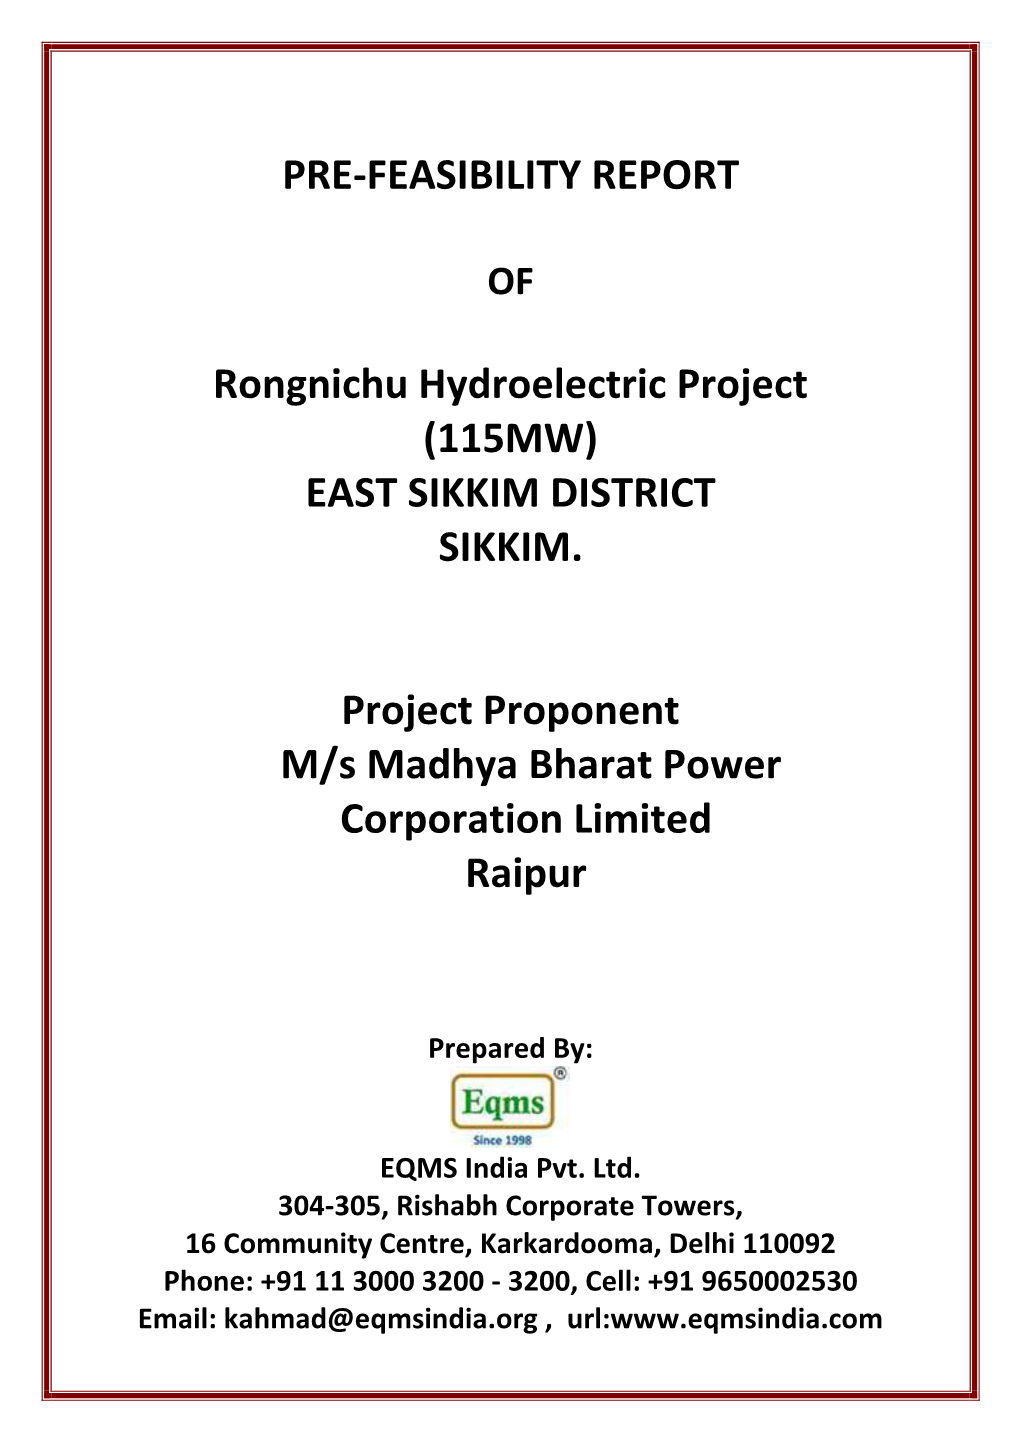 PRE-FEASIBILITY REPORT Rongnichu Hydroelectric Project